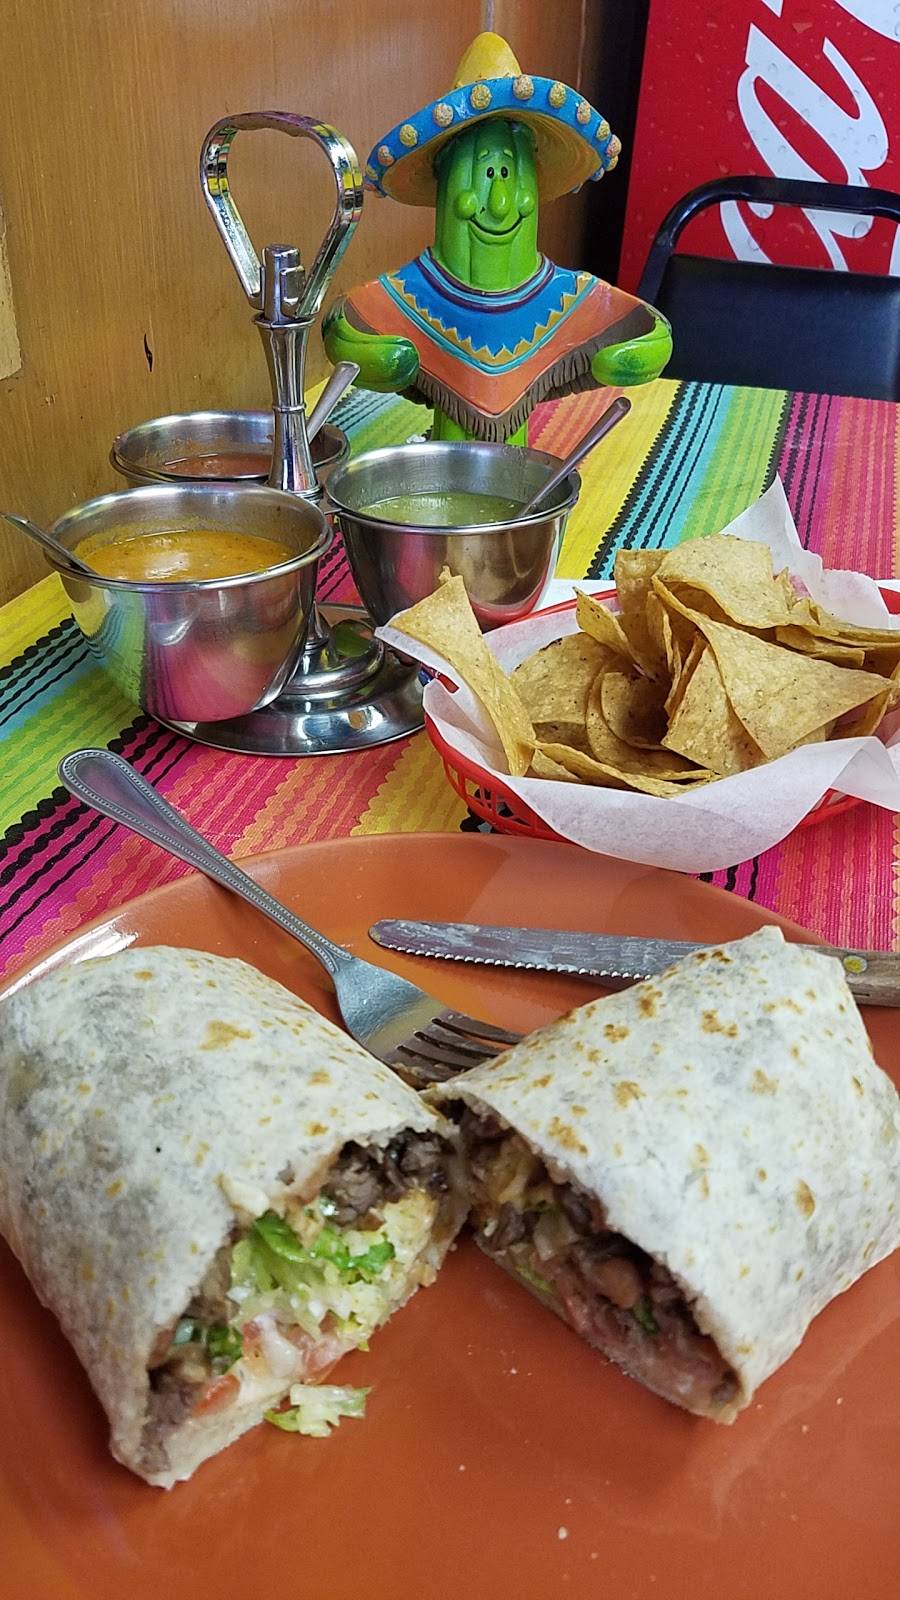 Tuxpan Mexican Grill | restaurant | 1227, 5540 N Milwaukee Ave, Chicago, IL 60630, USA | 7739304284 OR +1 773-930-4284